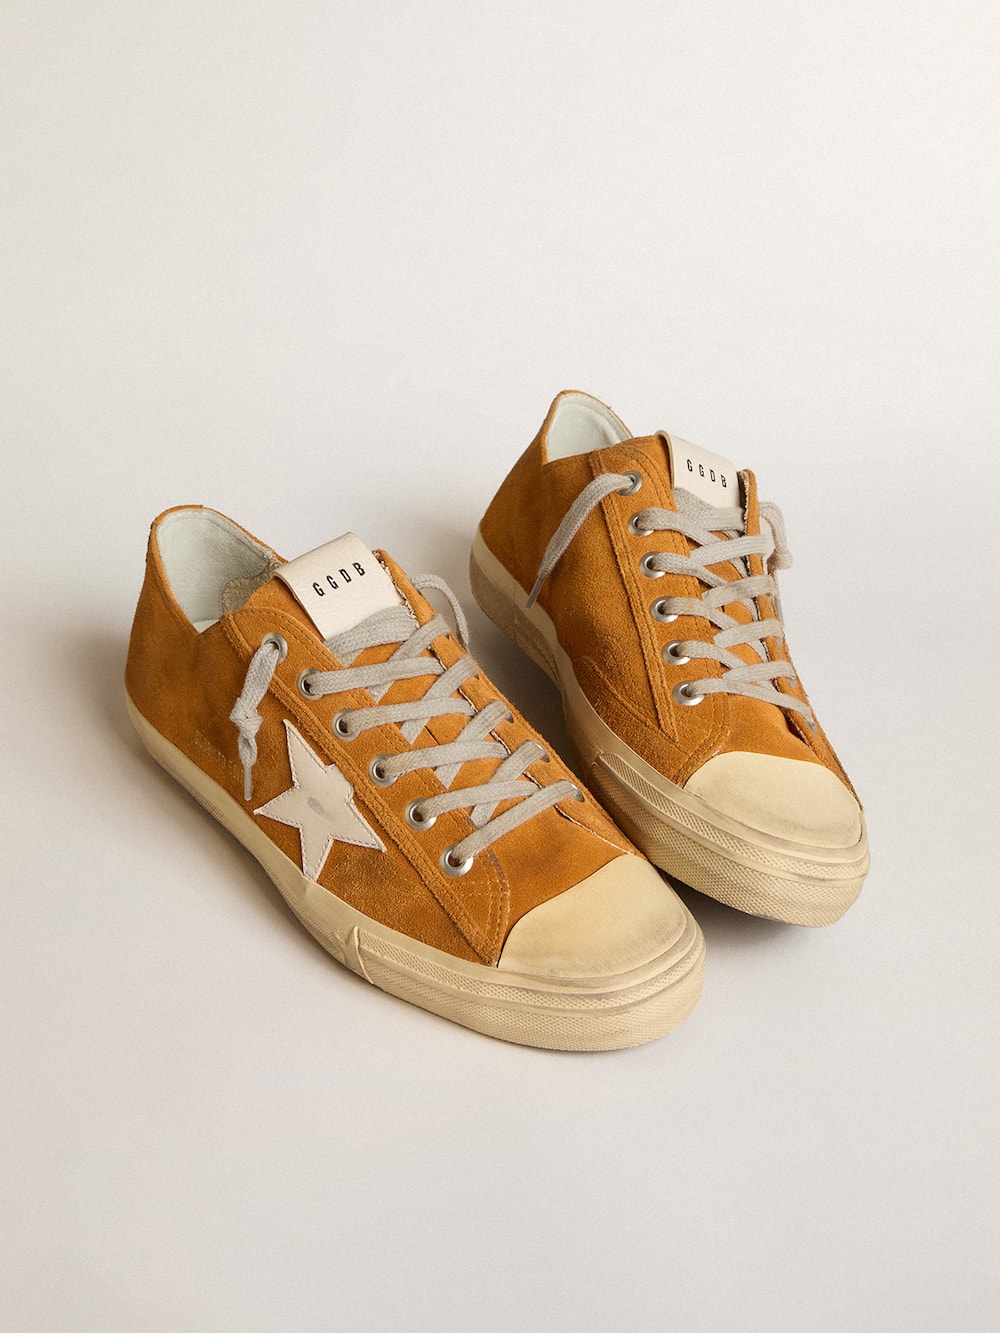 Golden Goose - Men's V-Star LTD in camel suede with a milk-white leather star in 